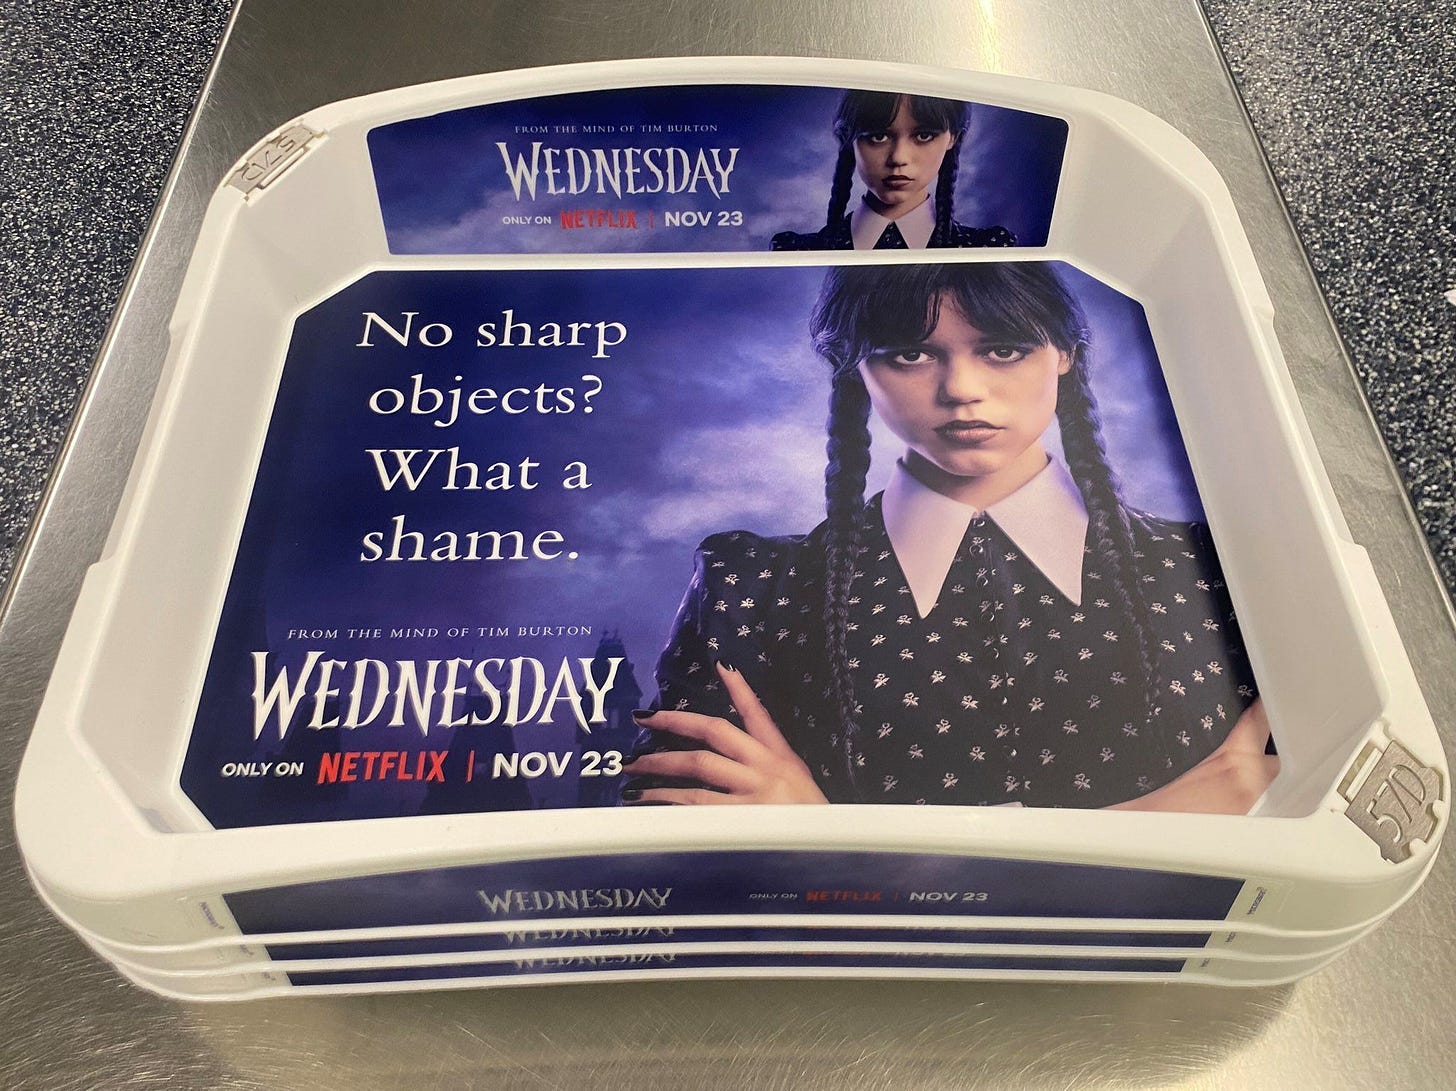 Hollywood Horror Museum on X: "Absolutely freaking brilliant way to sell  WEDNESDAY, putting this on Airport Security trays. https://t.co/mRzDnOFXRk"  / X